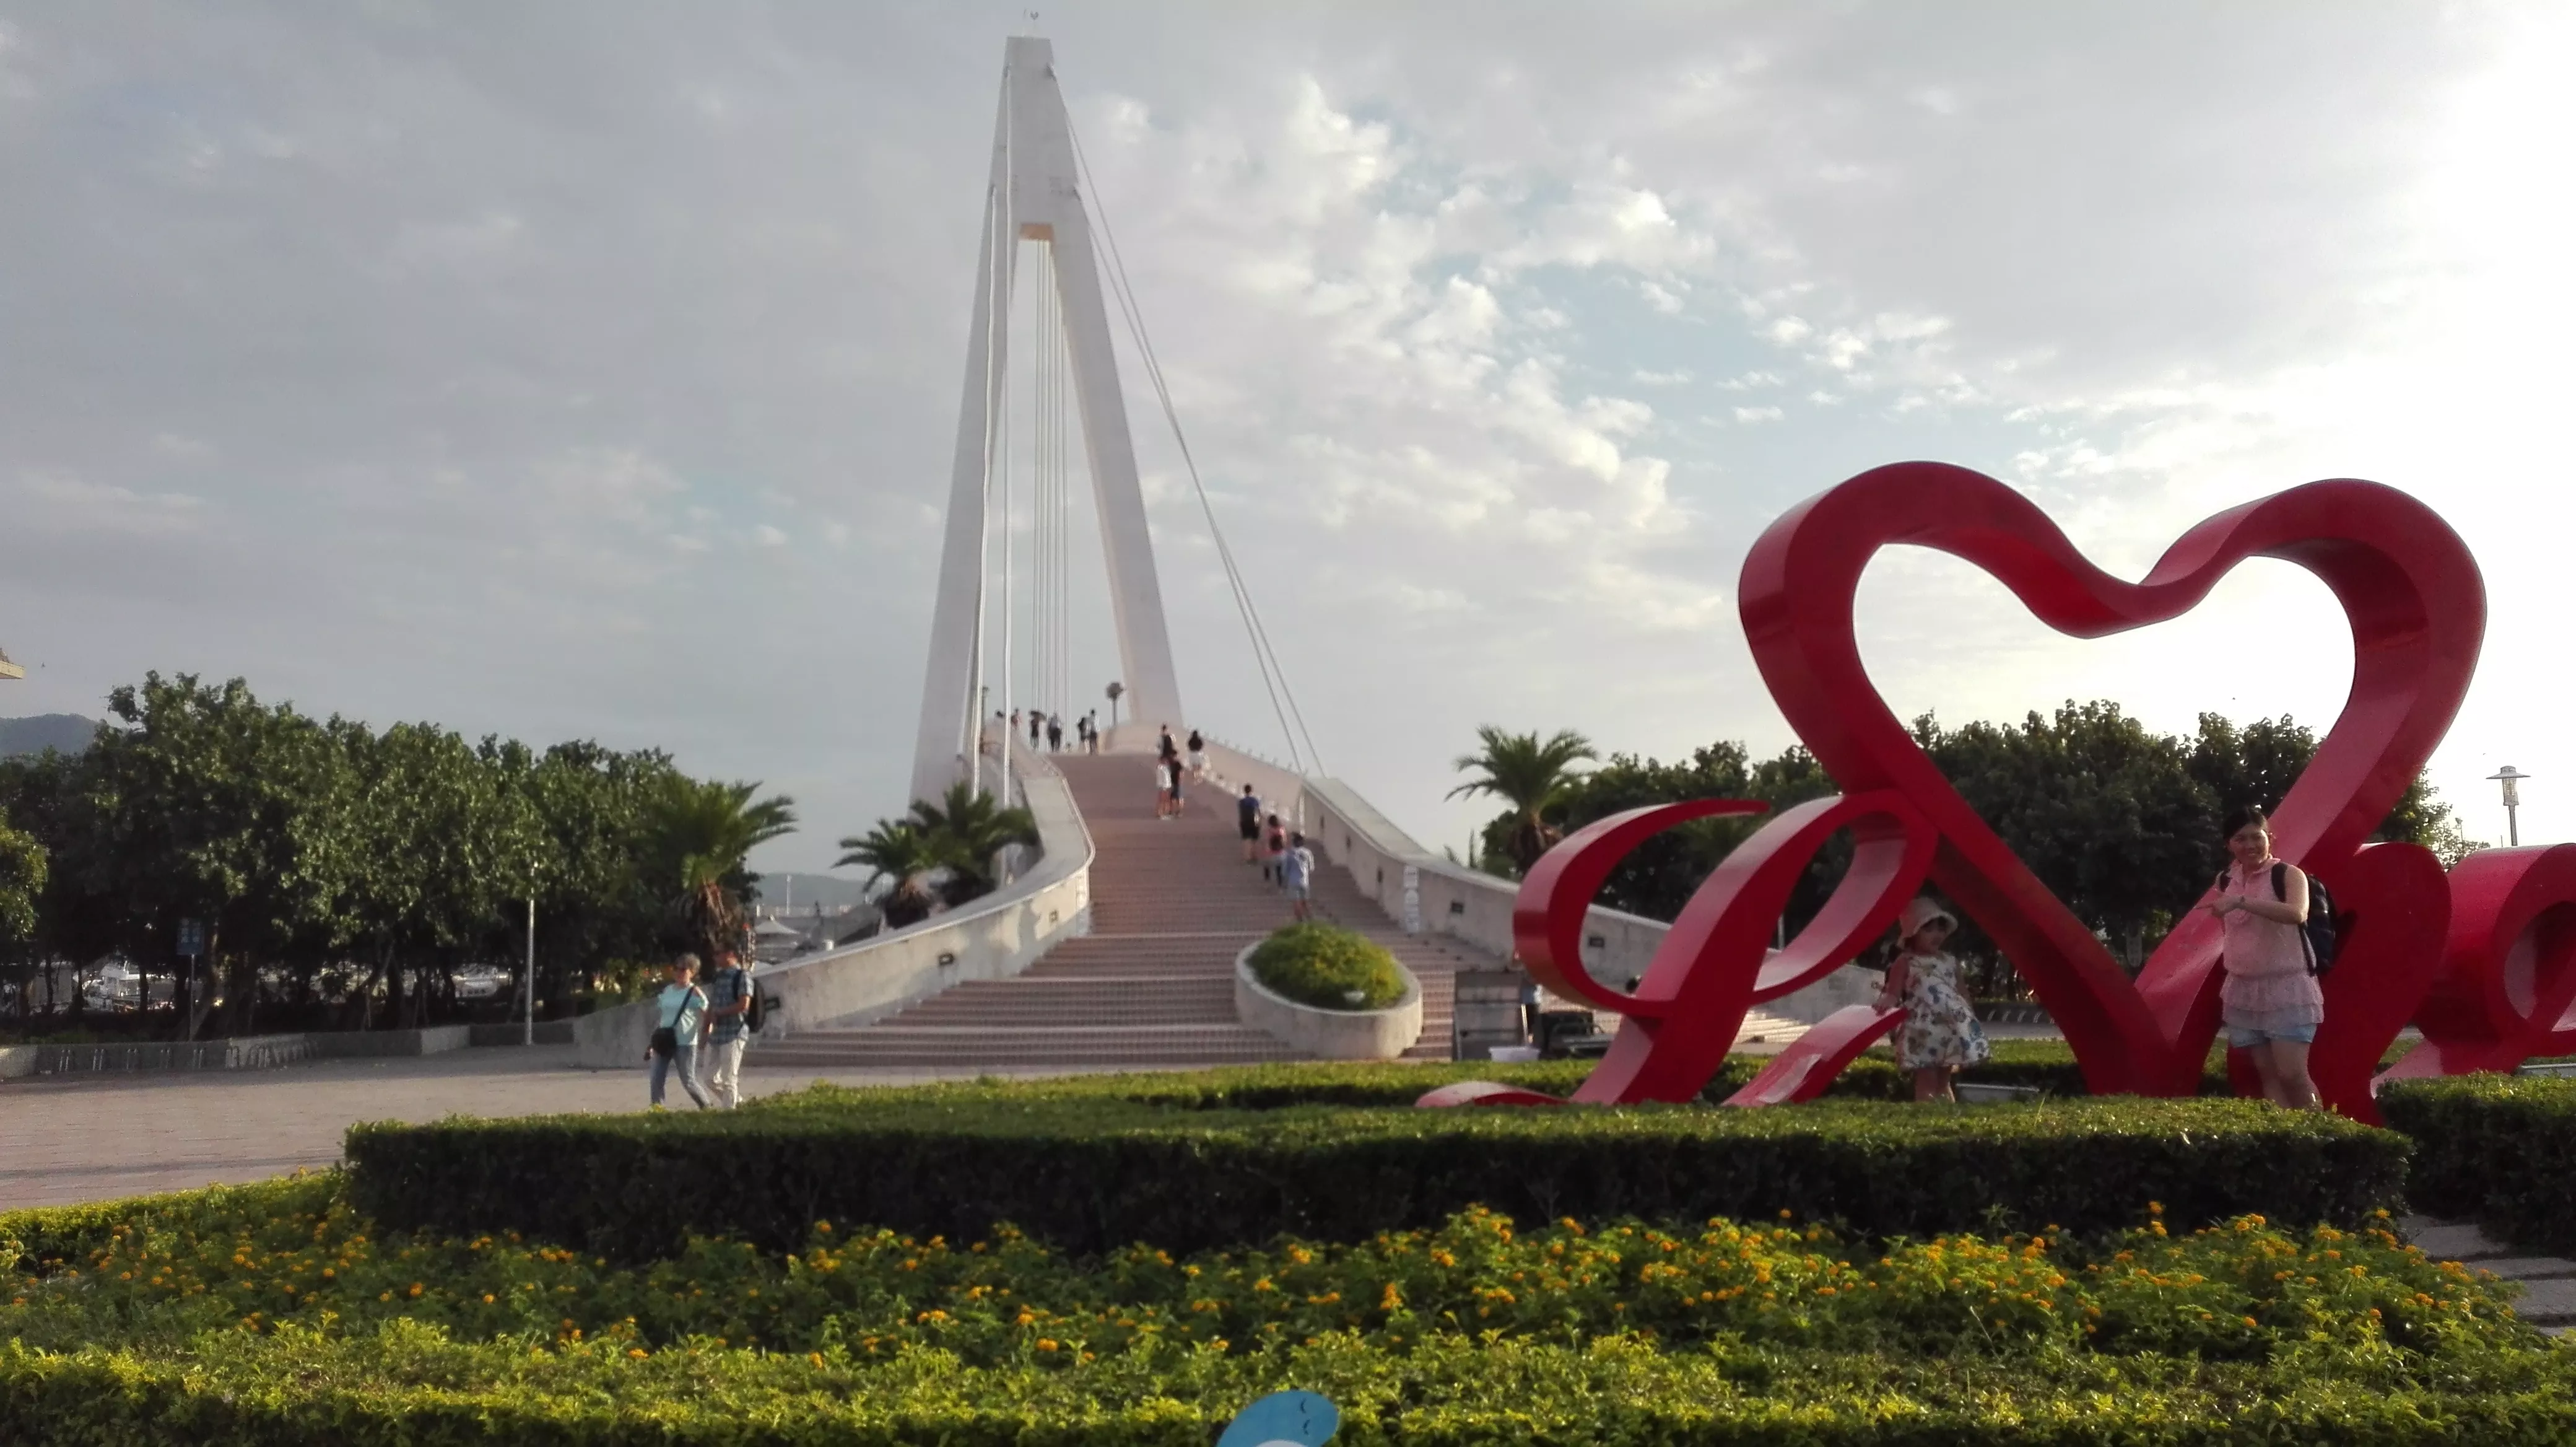 Lover's Bridge in Taiwan, East Asia | Architecture - Rated 3.5